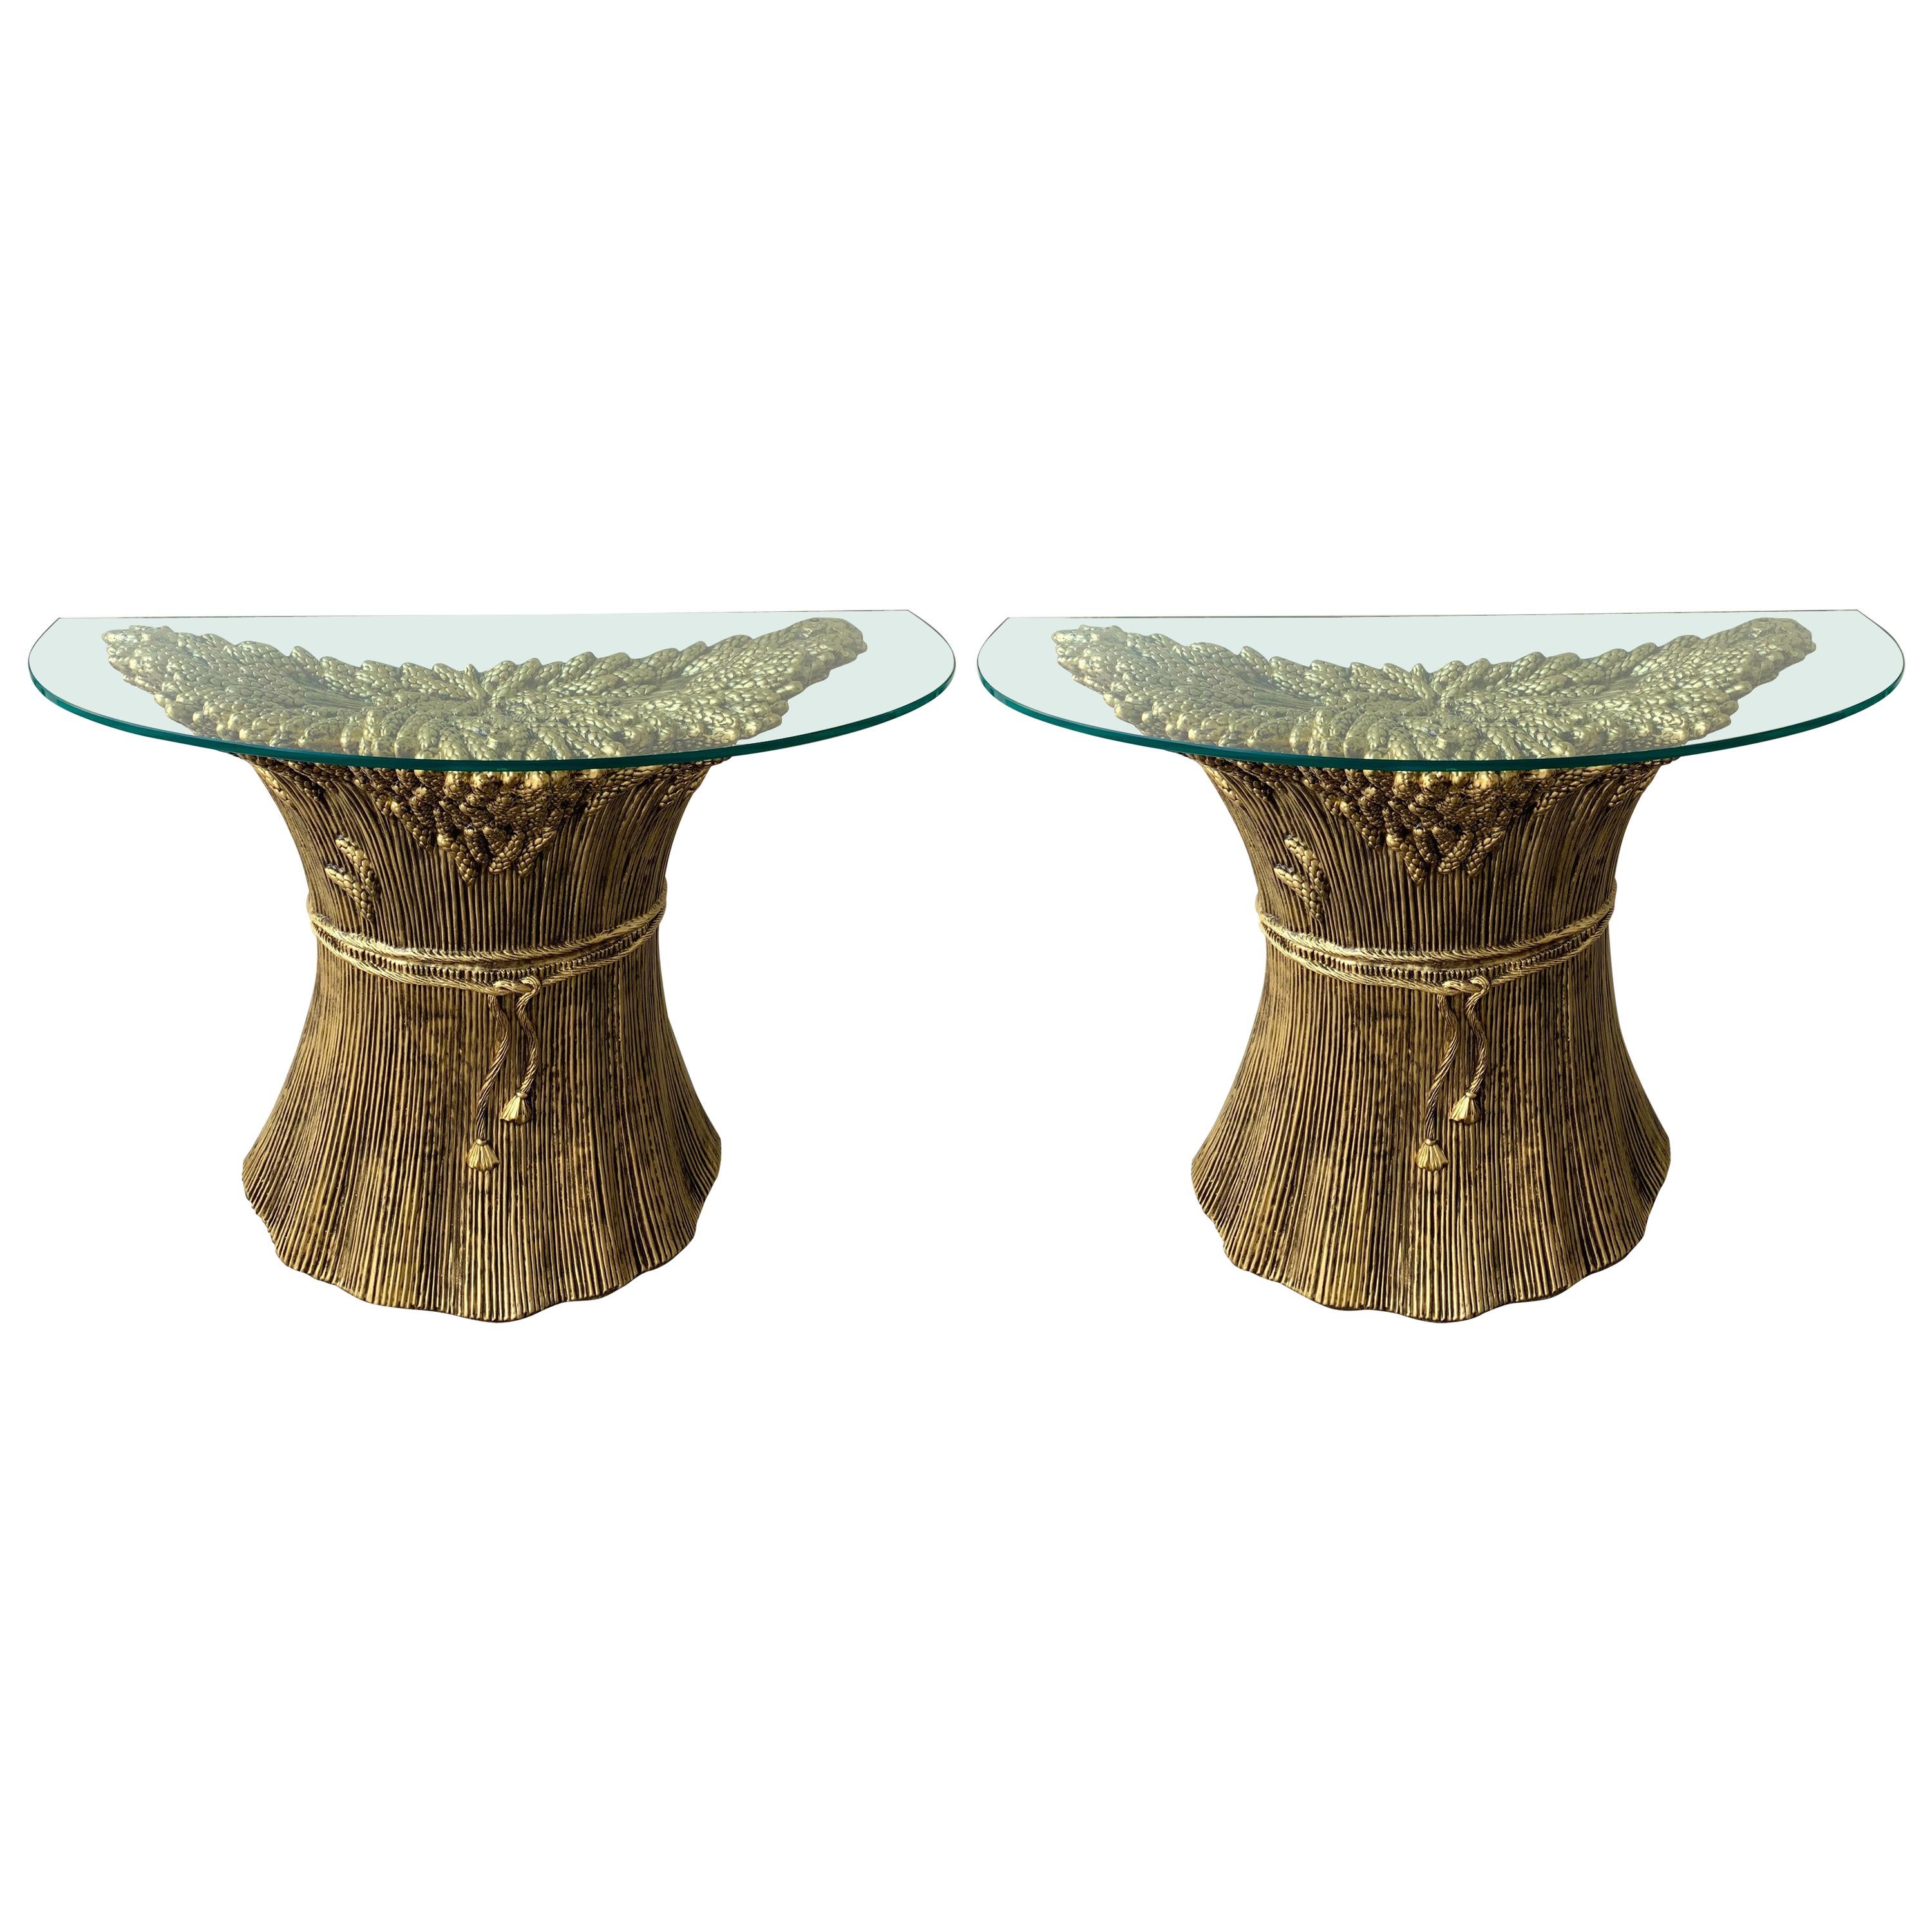 Pair of Gilt Ceramic Console ears of wheat by Panzeri. Italy, 1980s